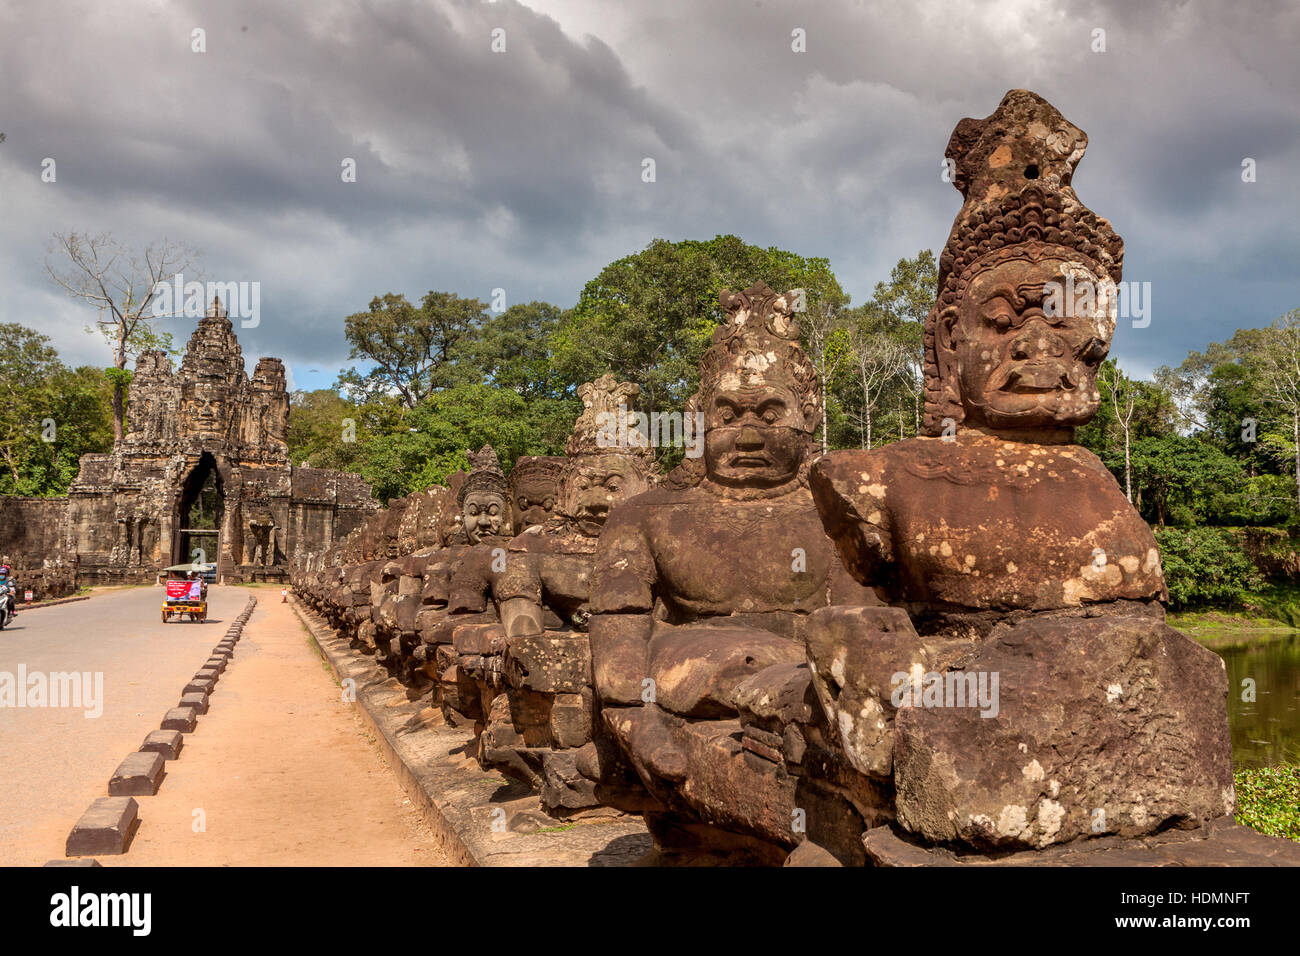 Asura statues hold the Cobra snake deity Naga on the side of the road leading to the South Gate of Ta Prohm, Cambodia. Stock Photo